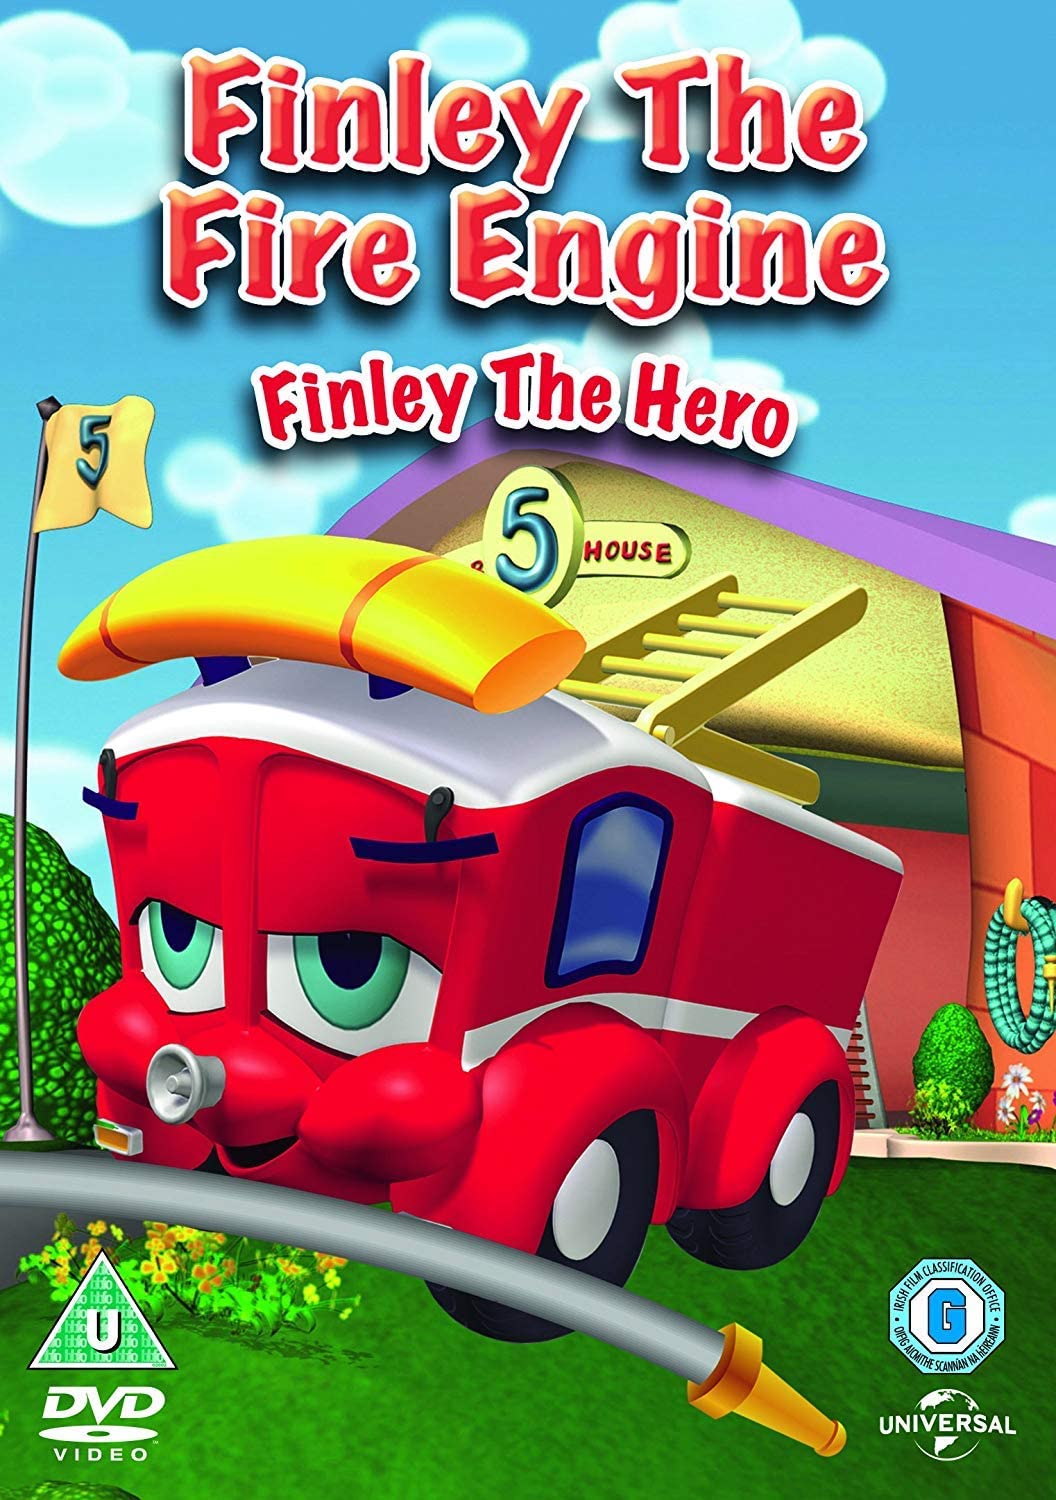 Finley The Fire Engine: Finley The Hero - Animation [DVD]